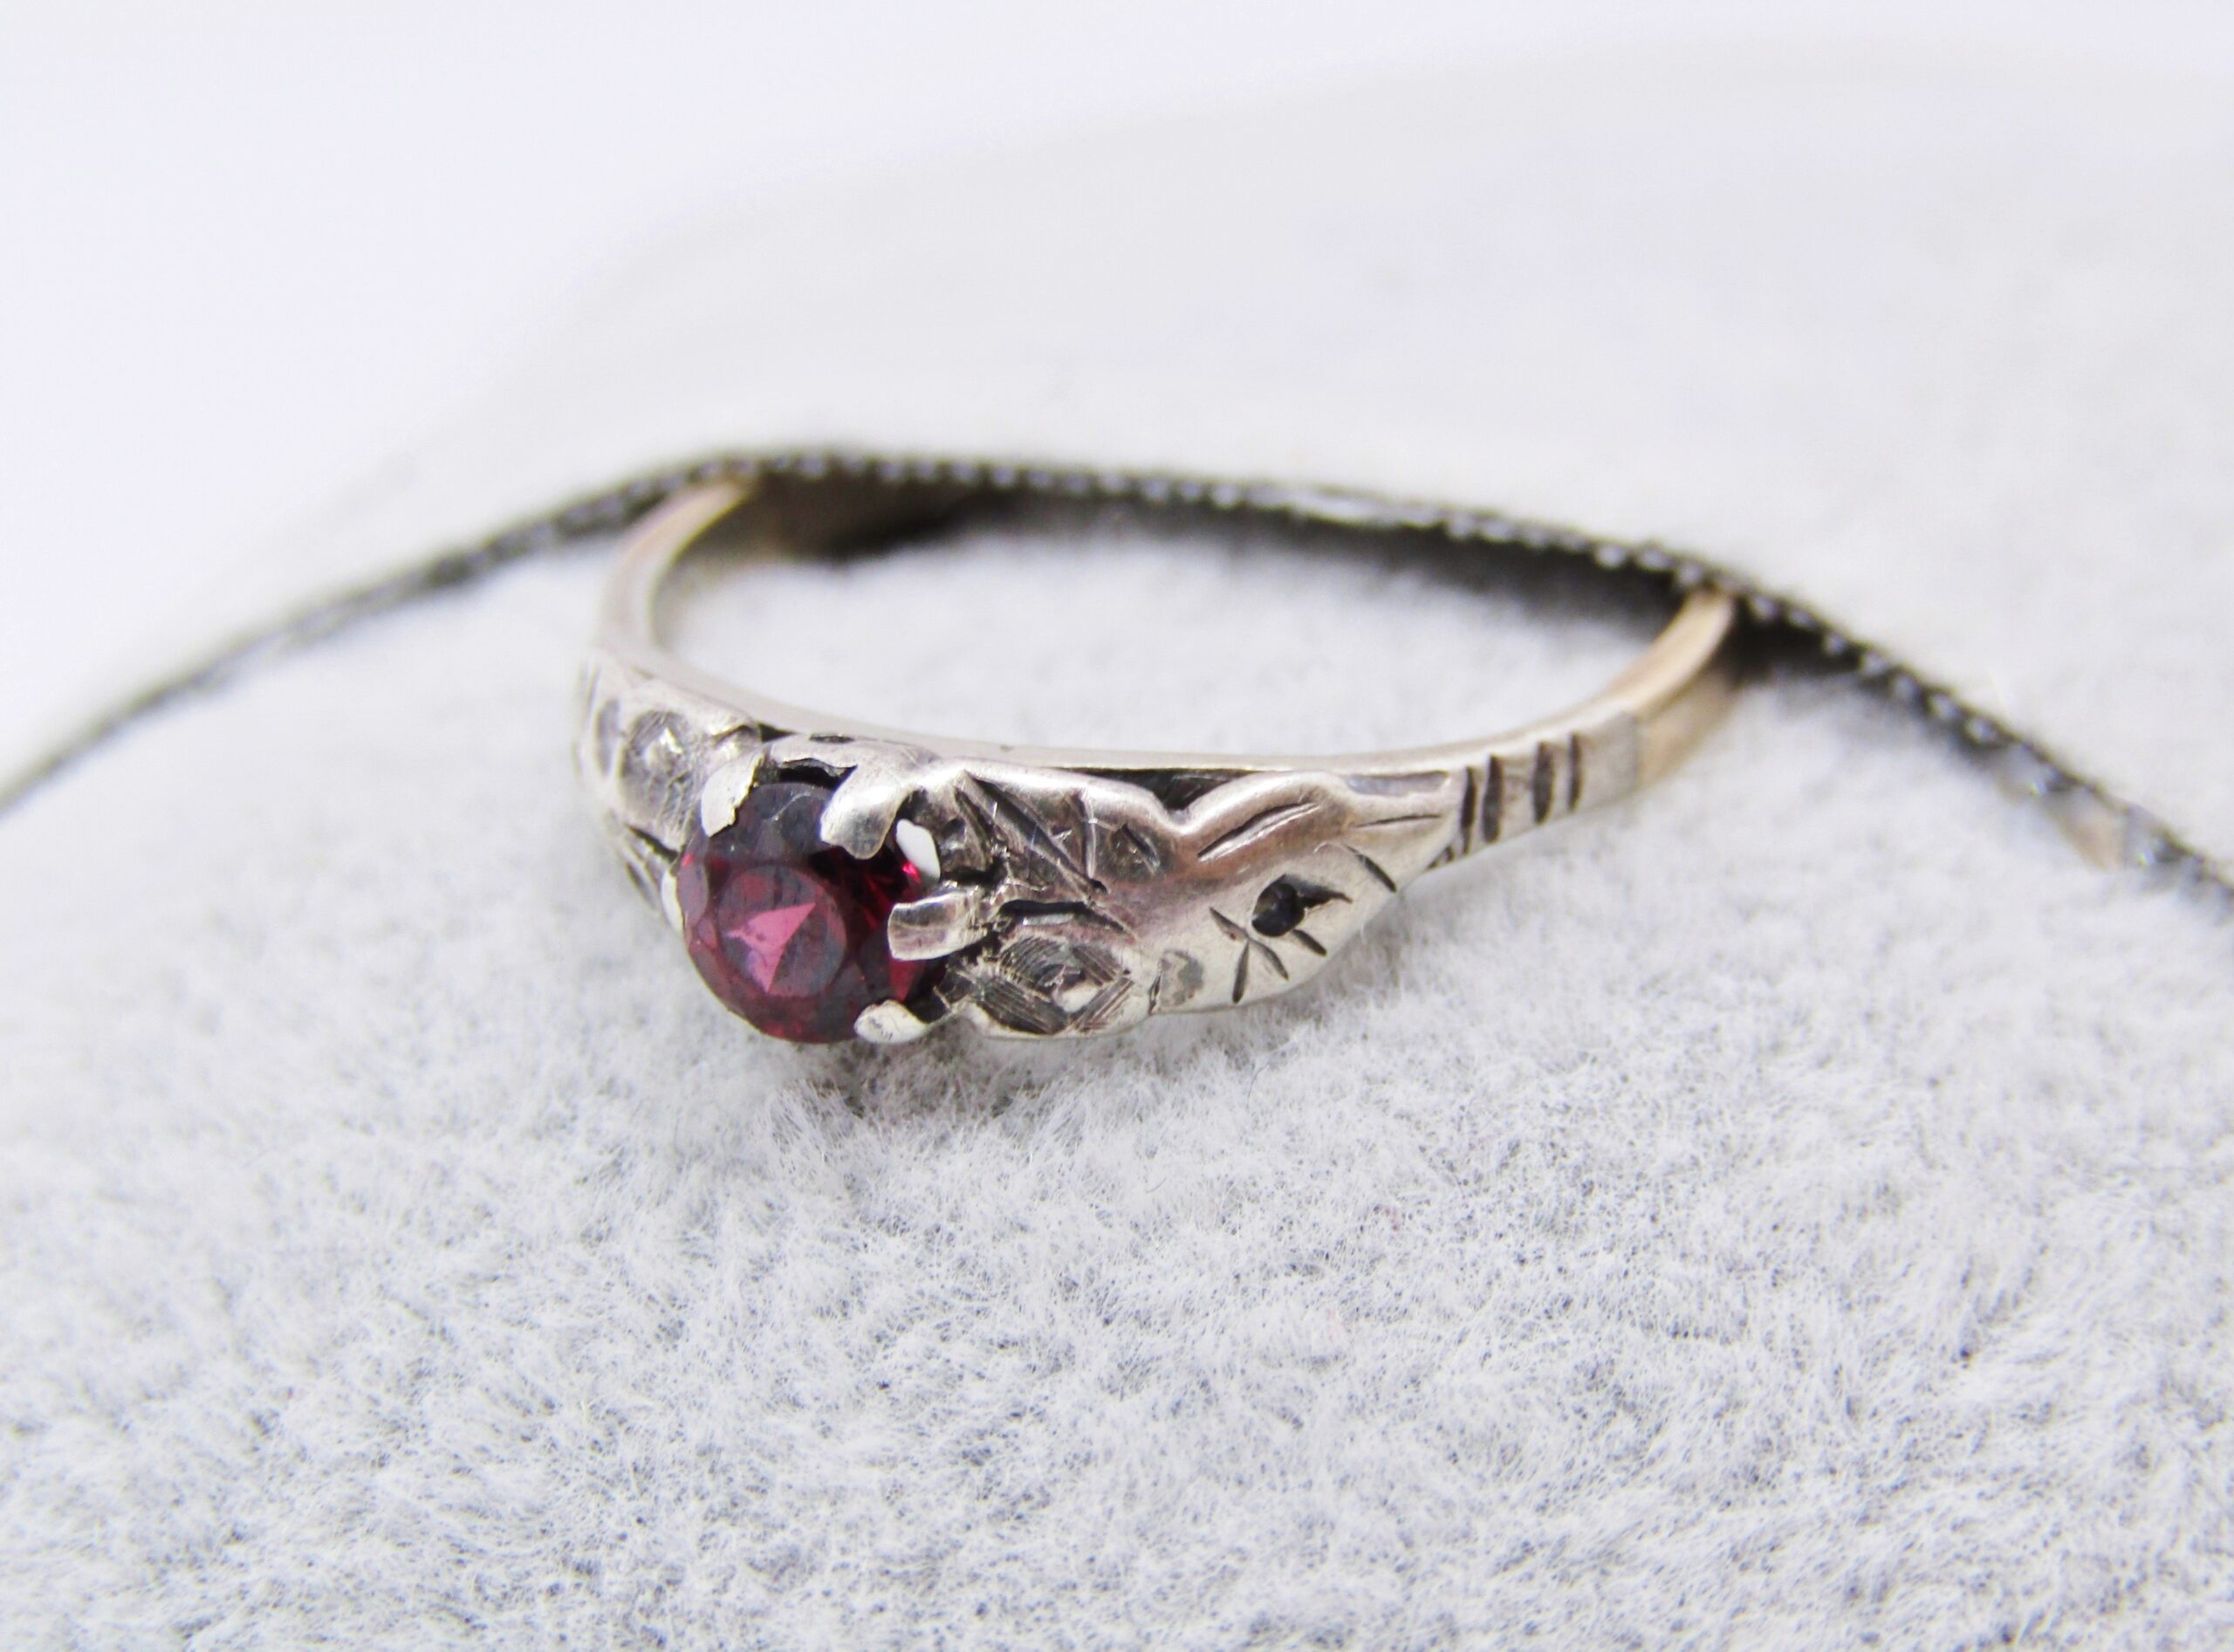 Vintage 9CT Gold & Silver Ring with Garnet